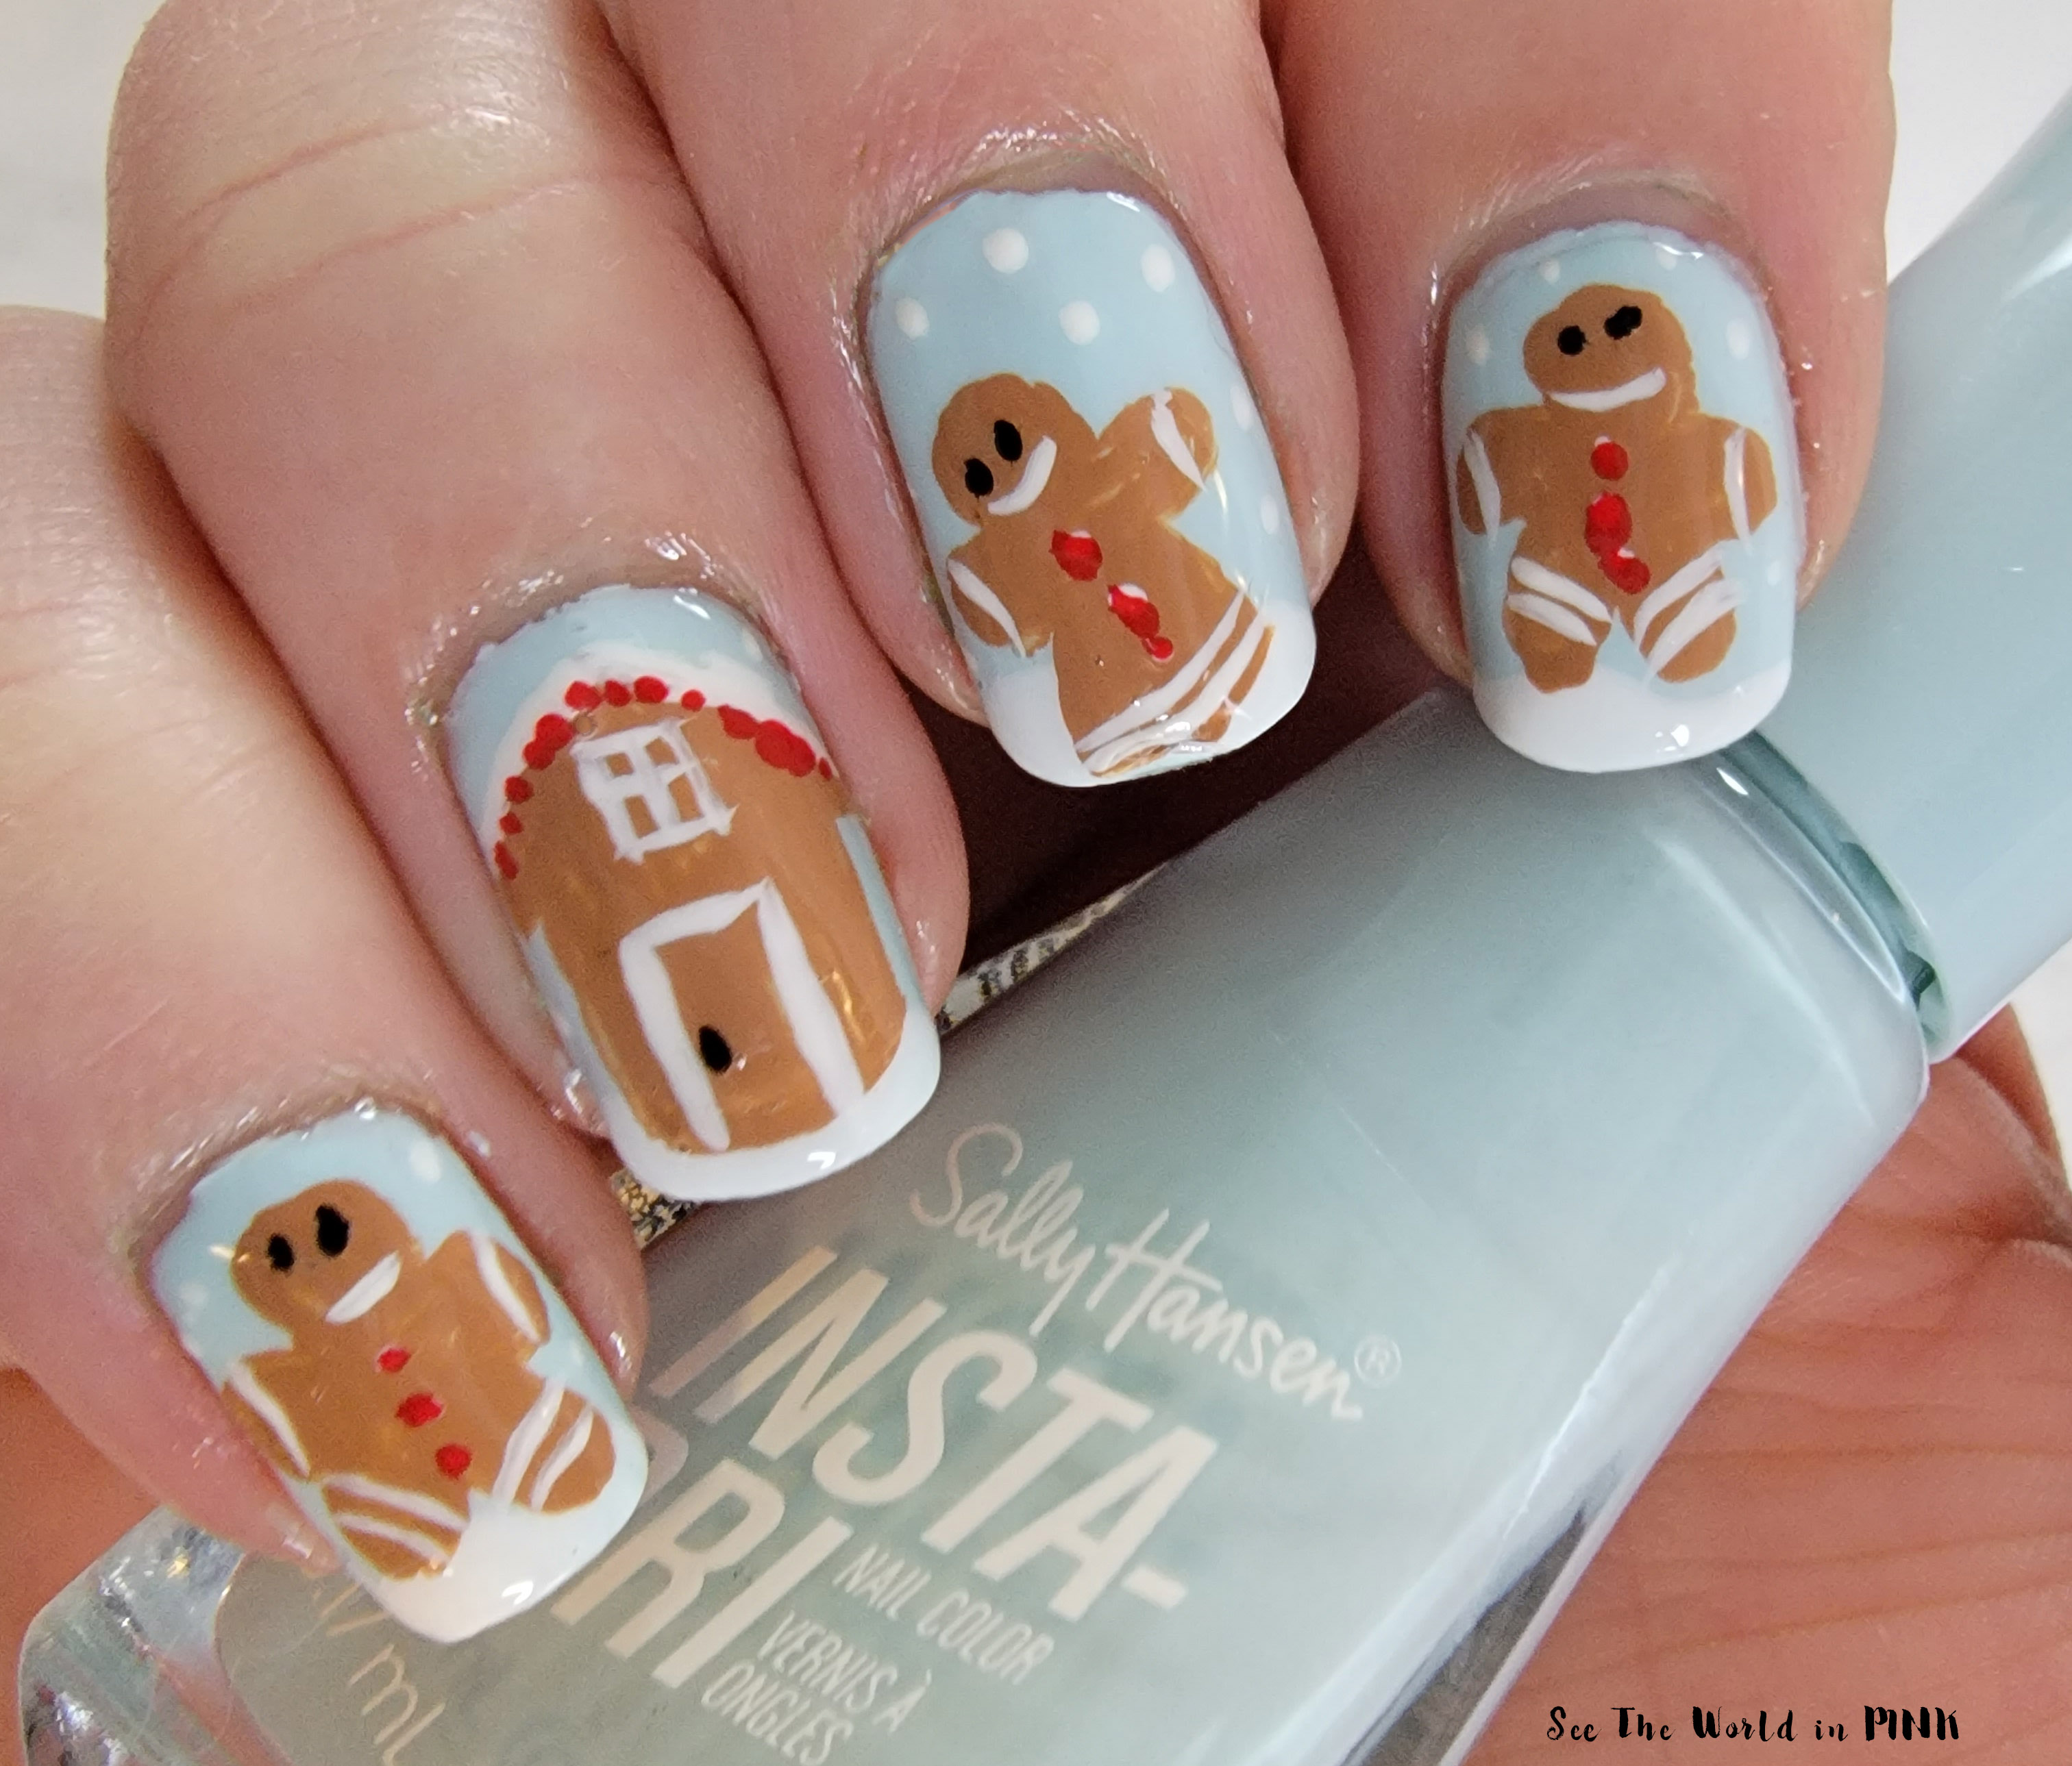 Manicure Monday - Gingerbread Nails